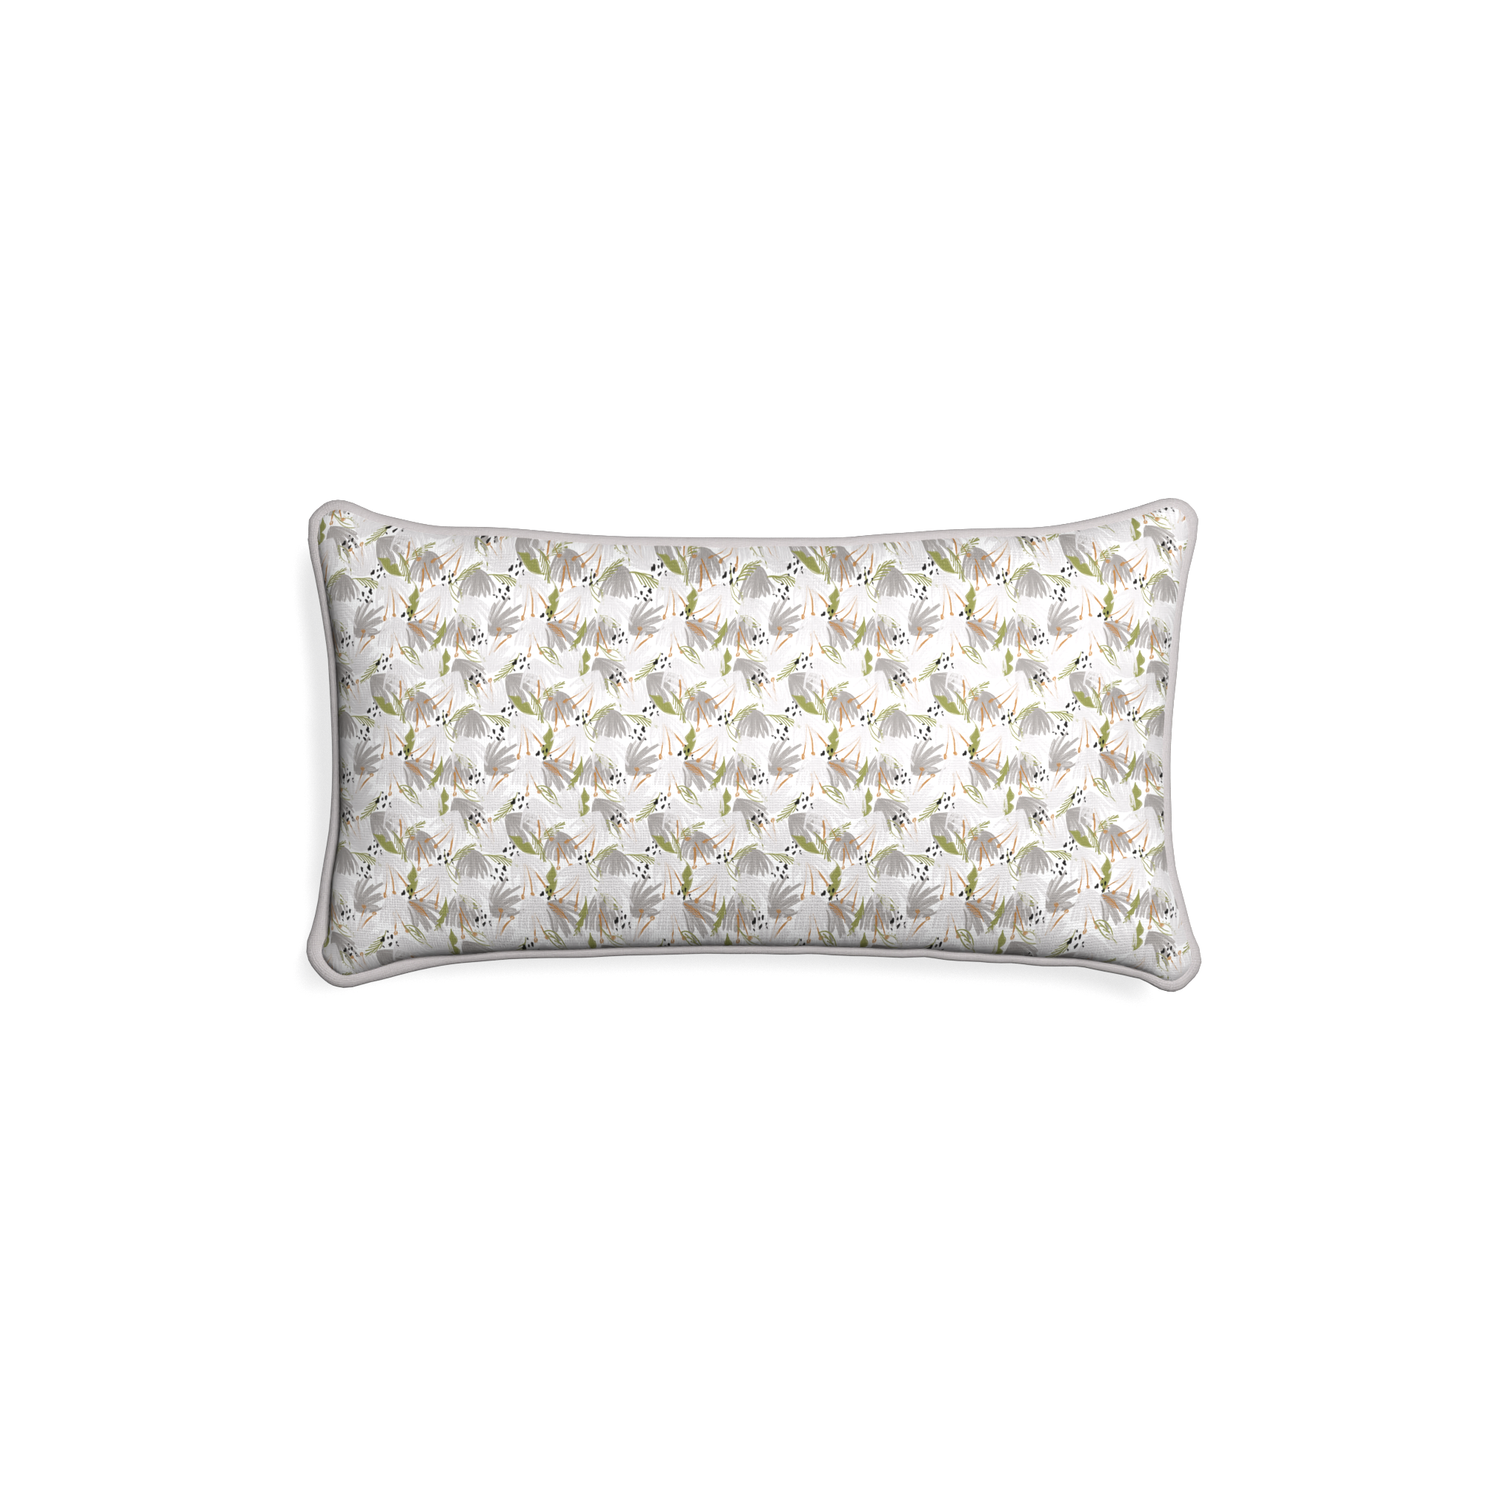 Petite-lumbar eden grey custom grey floralpillow with pebble piping on white background